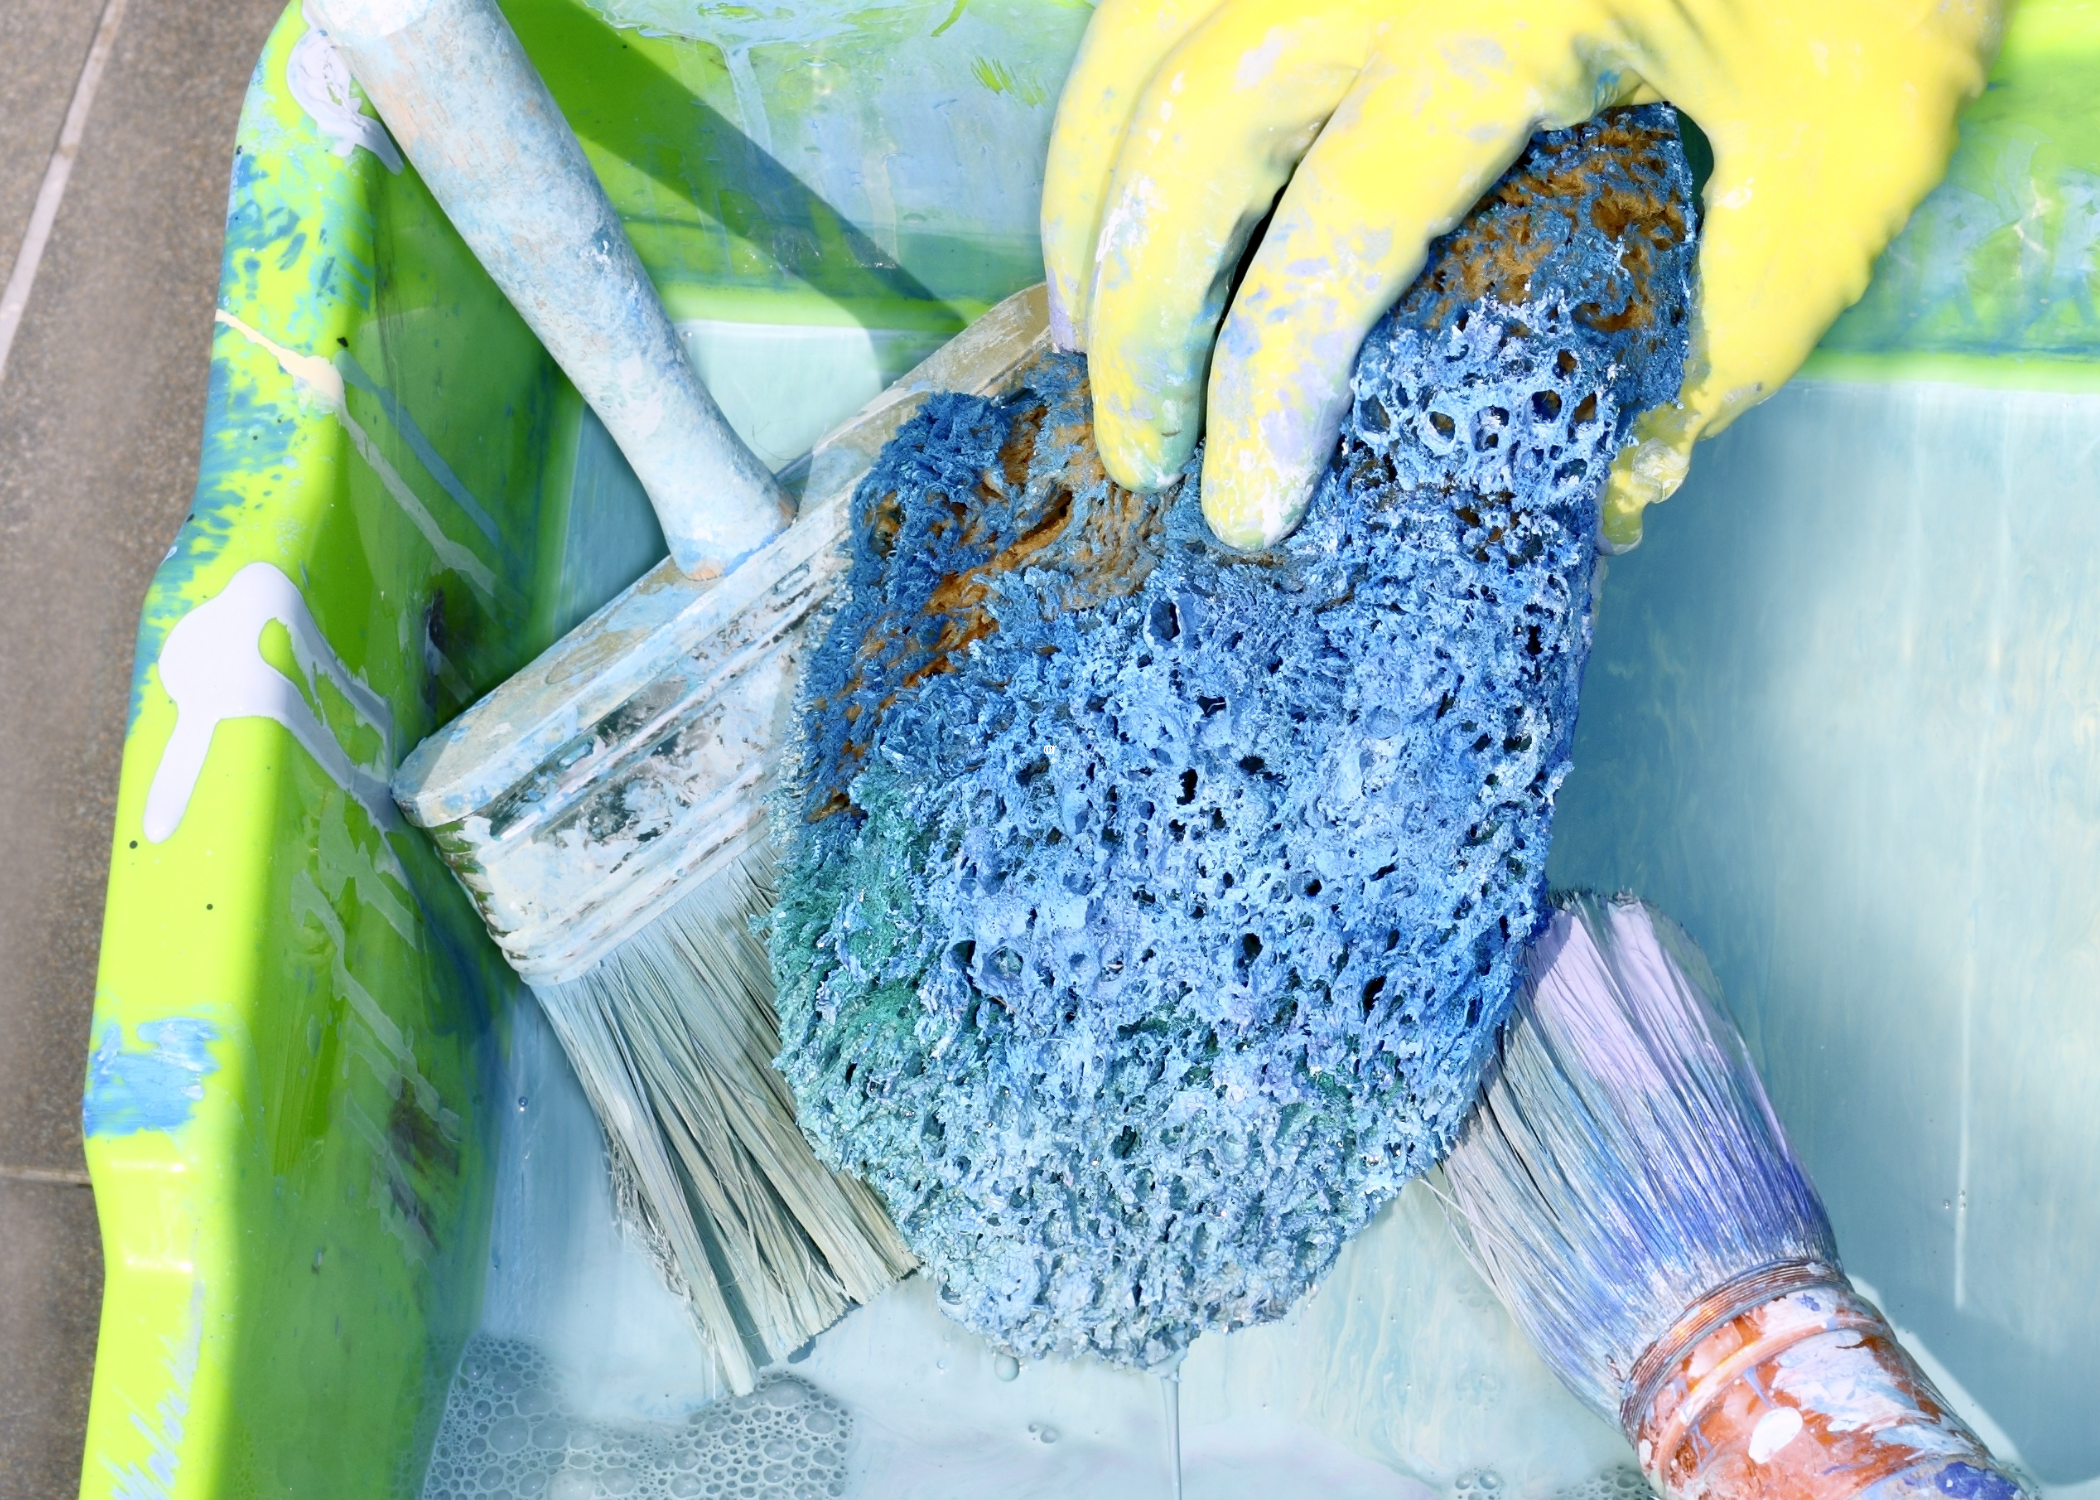 cleaning paint brushes with sponge